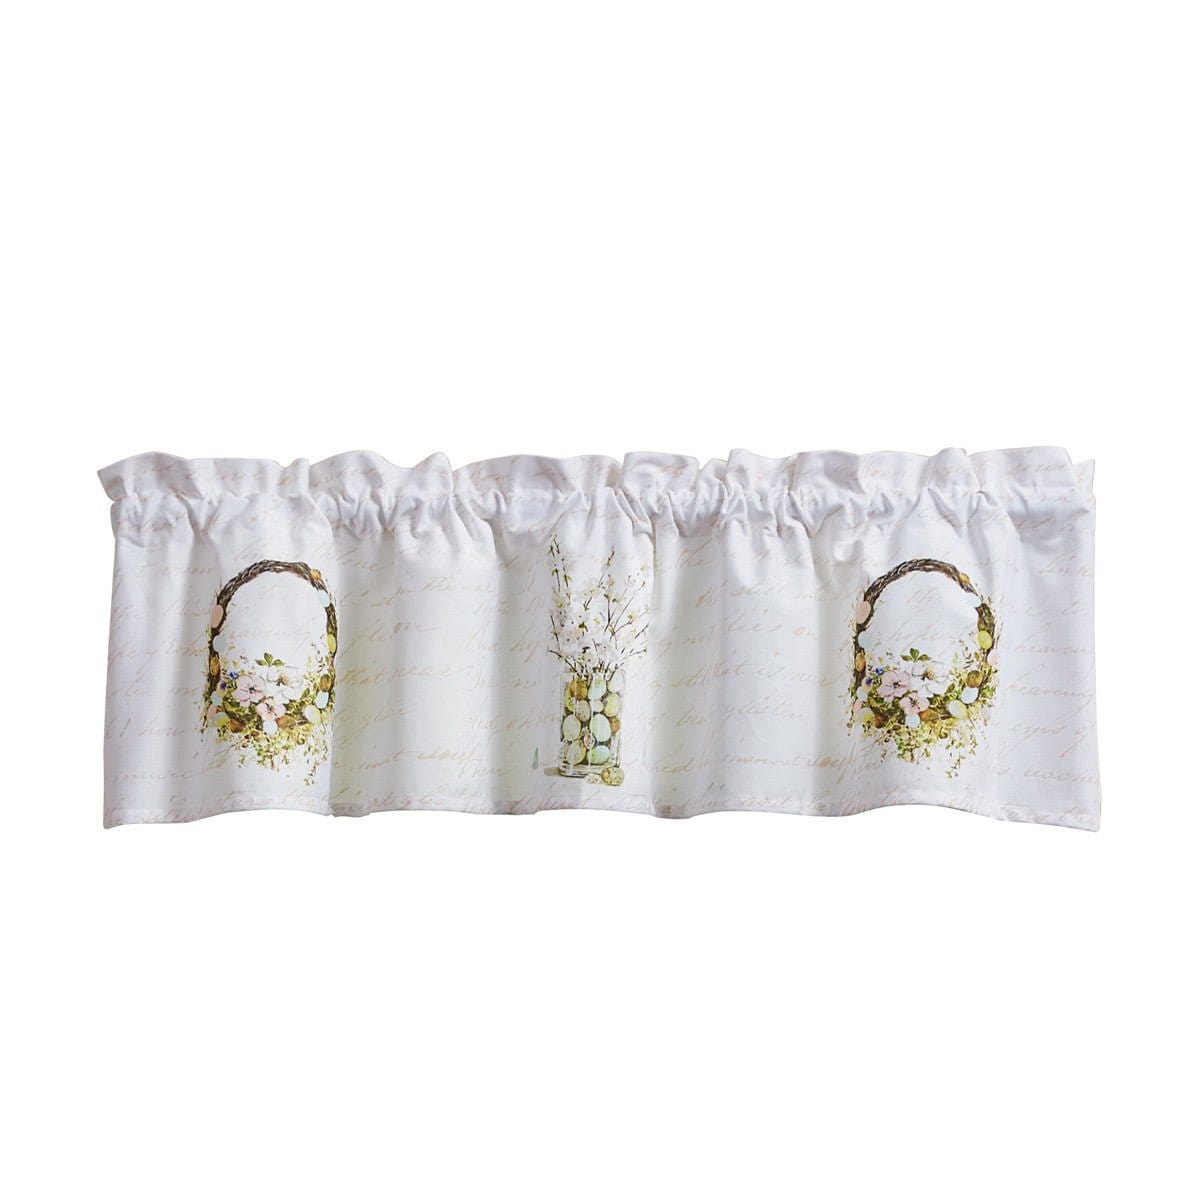 Spring In Bloom Printed Valance Unlined-Park Designs-The Village Merchant